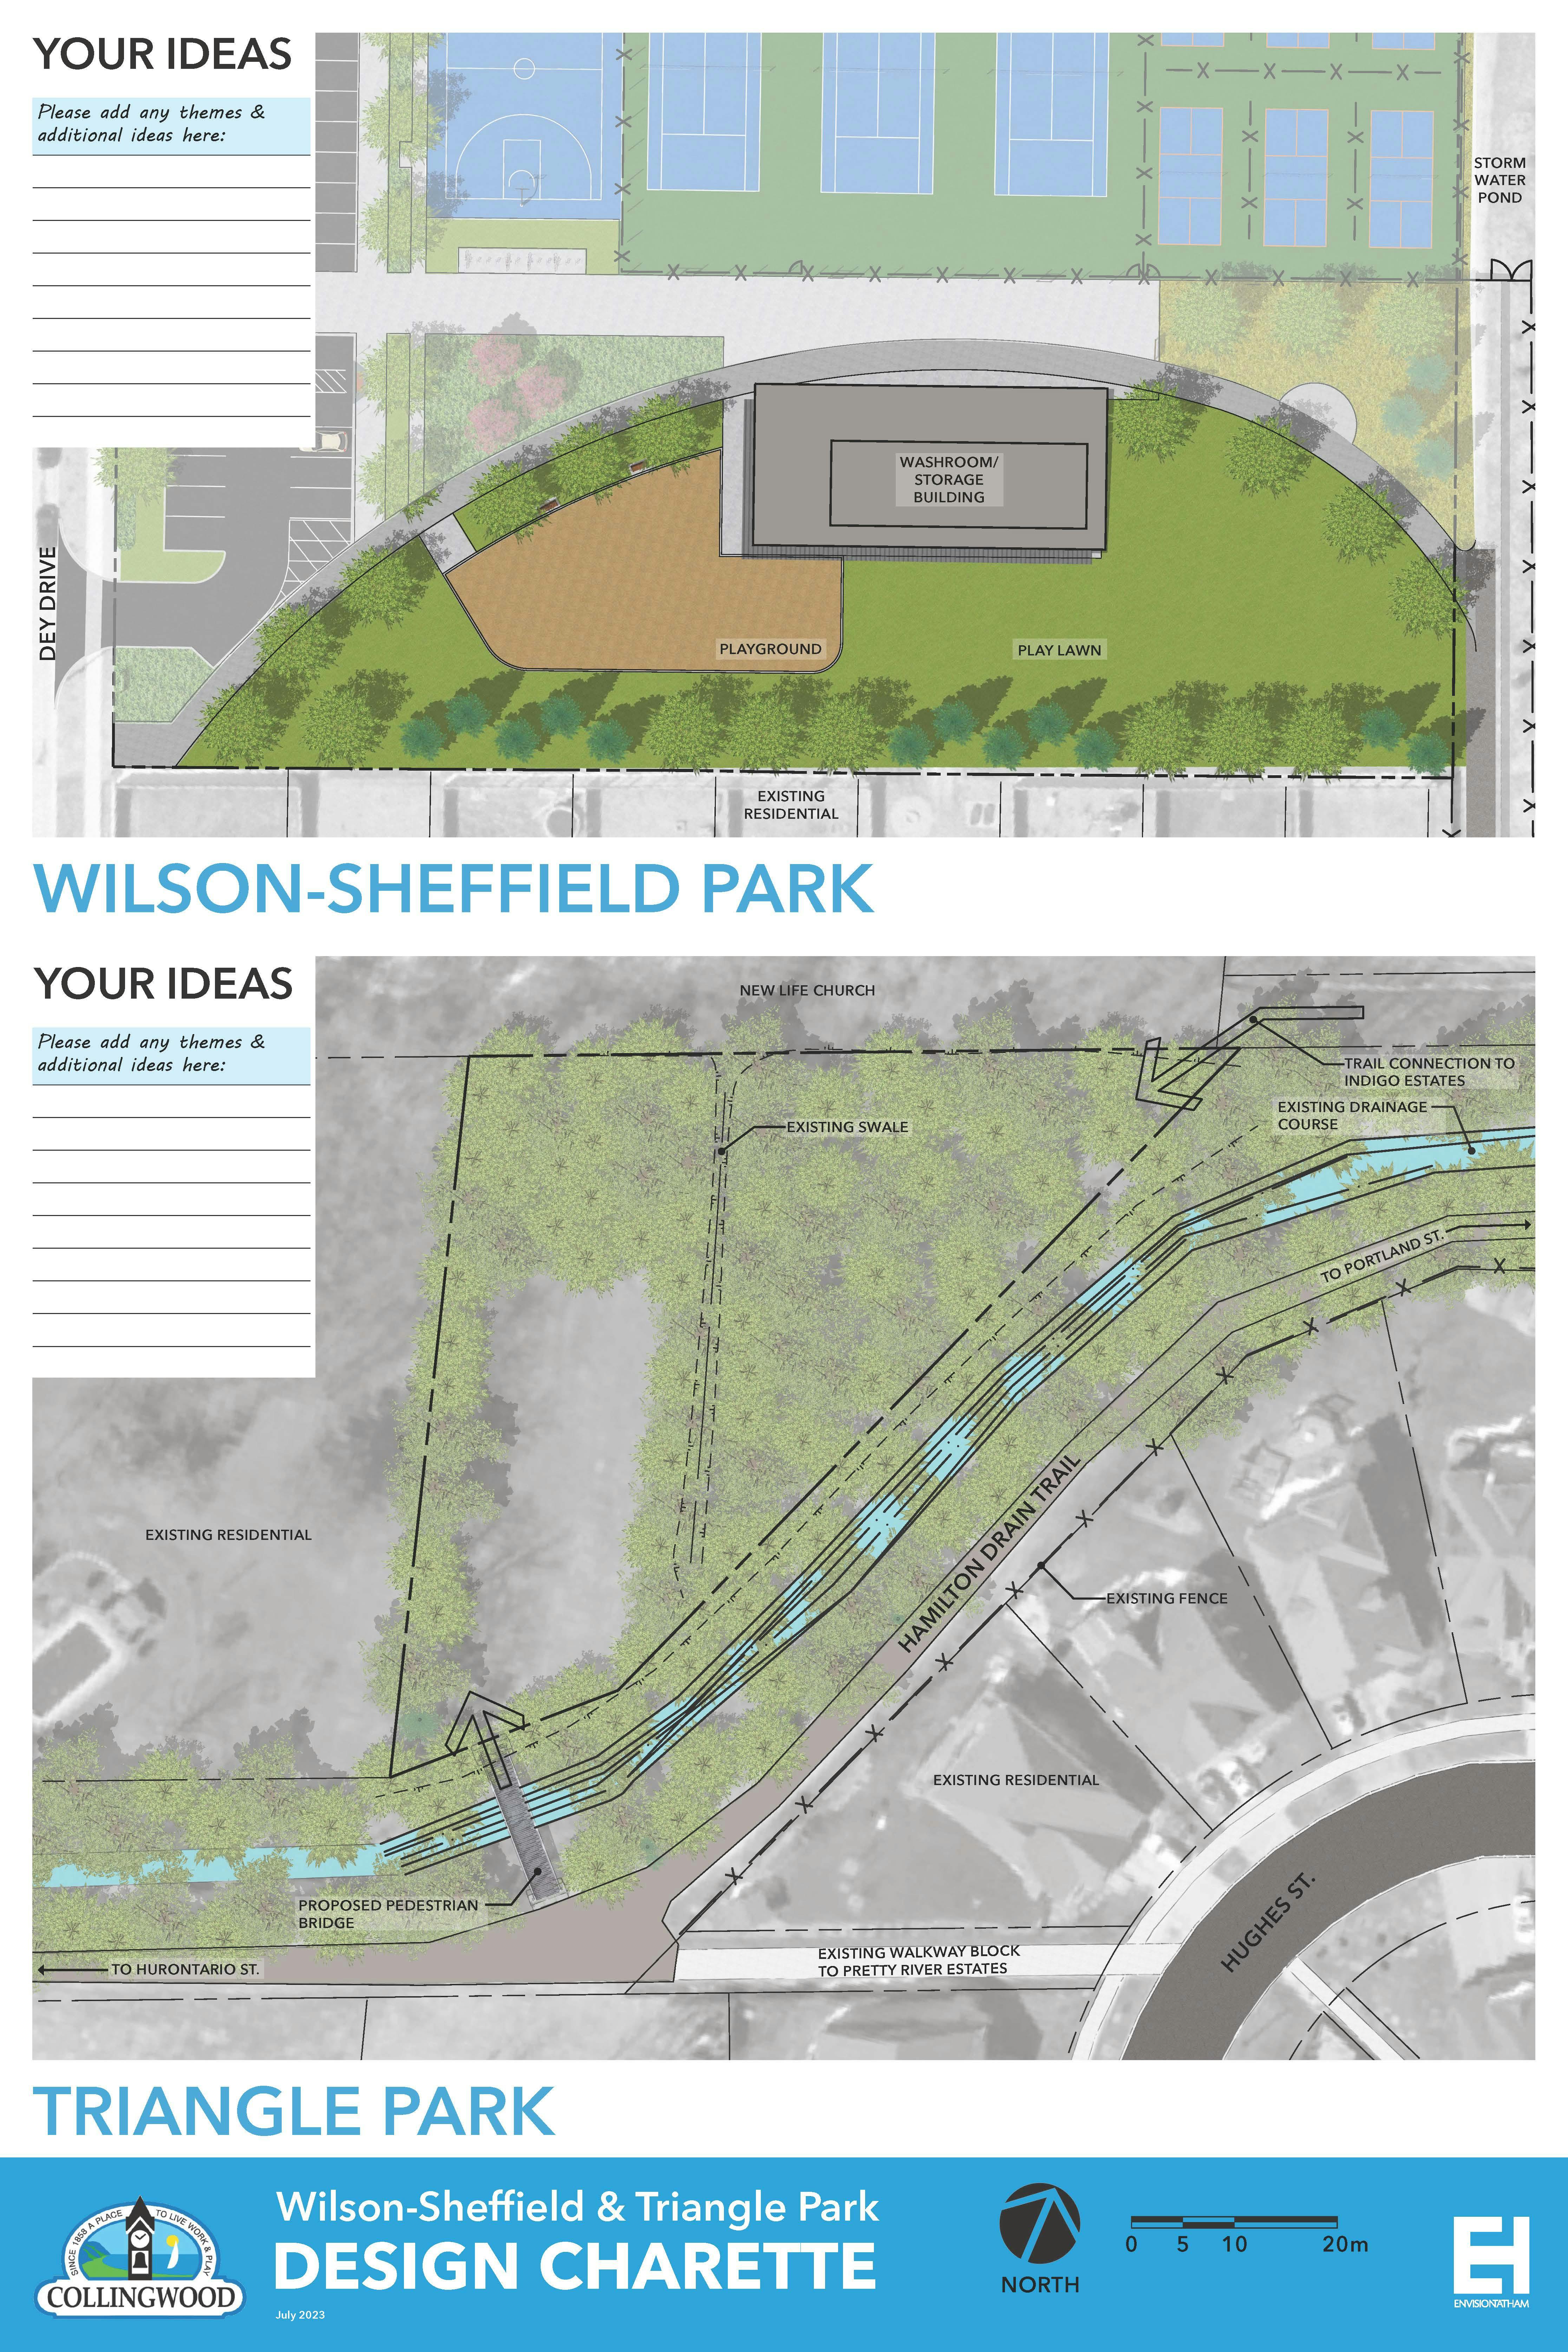 Examples of community engagement mapping used as part of design charette of both Triangle Park and Wilson-Sheffield Community Park. 